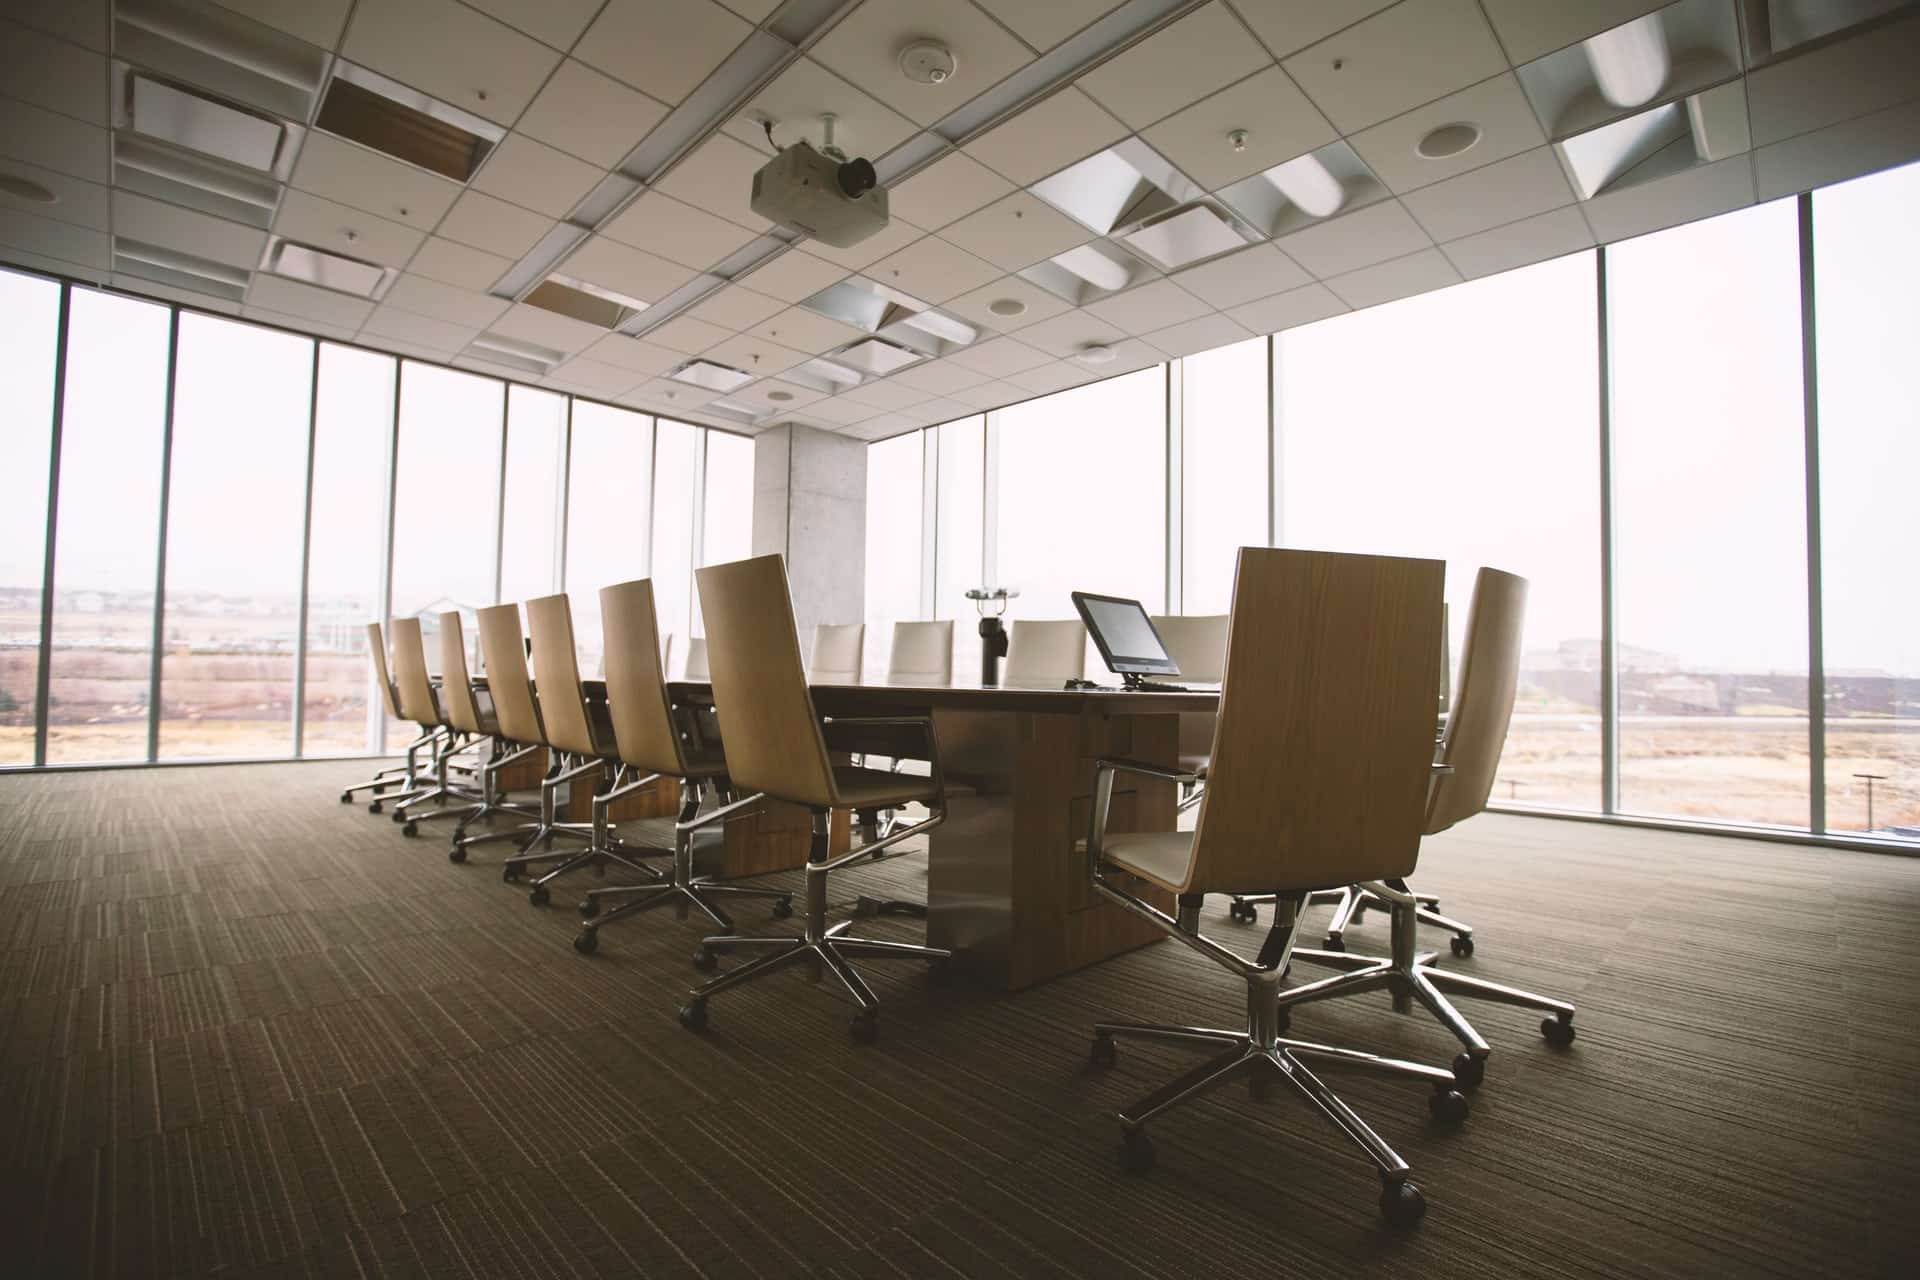 Boardroom representing personal liability for corporate directors for unpaid wages